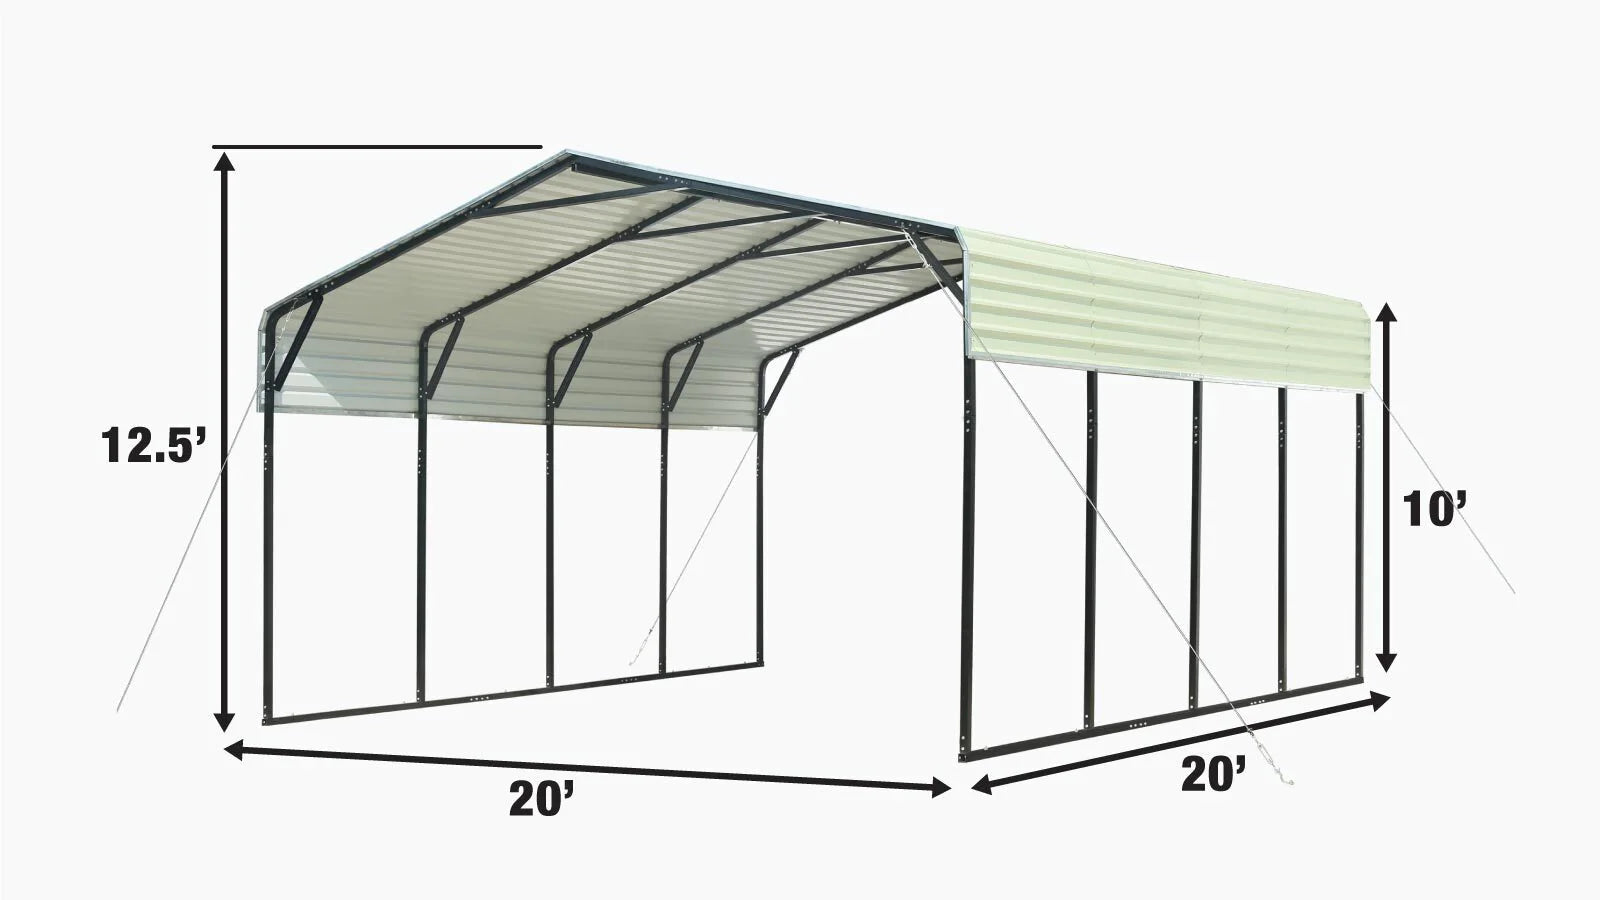 TMG Industrial 20’ x 20’ All-Steel Carport w/10’ Open Sidewalls, Galvanized Roof, Powder Coated, Polyester Paint Coating, Stabilizing Cables, TMG-CP2020-specifications-image